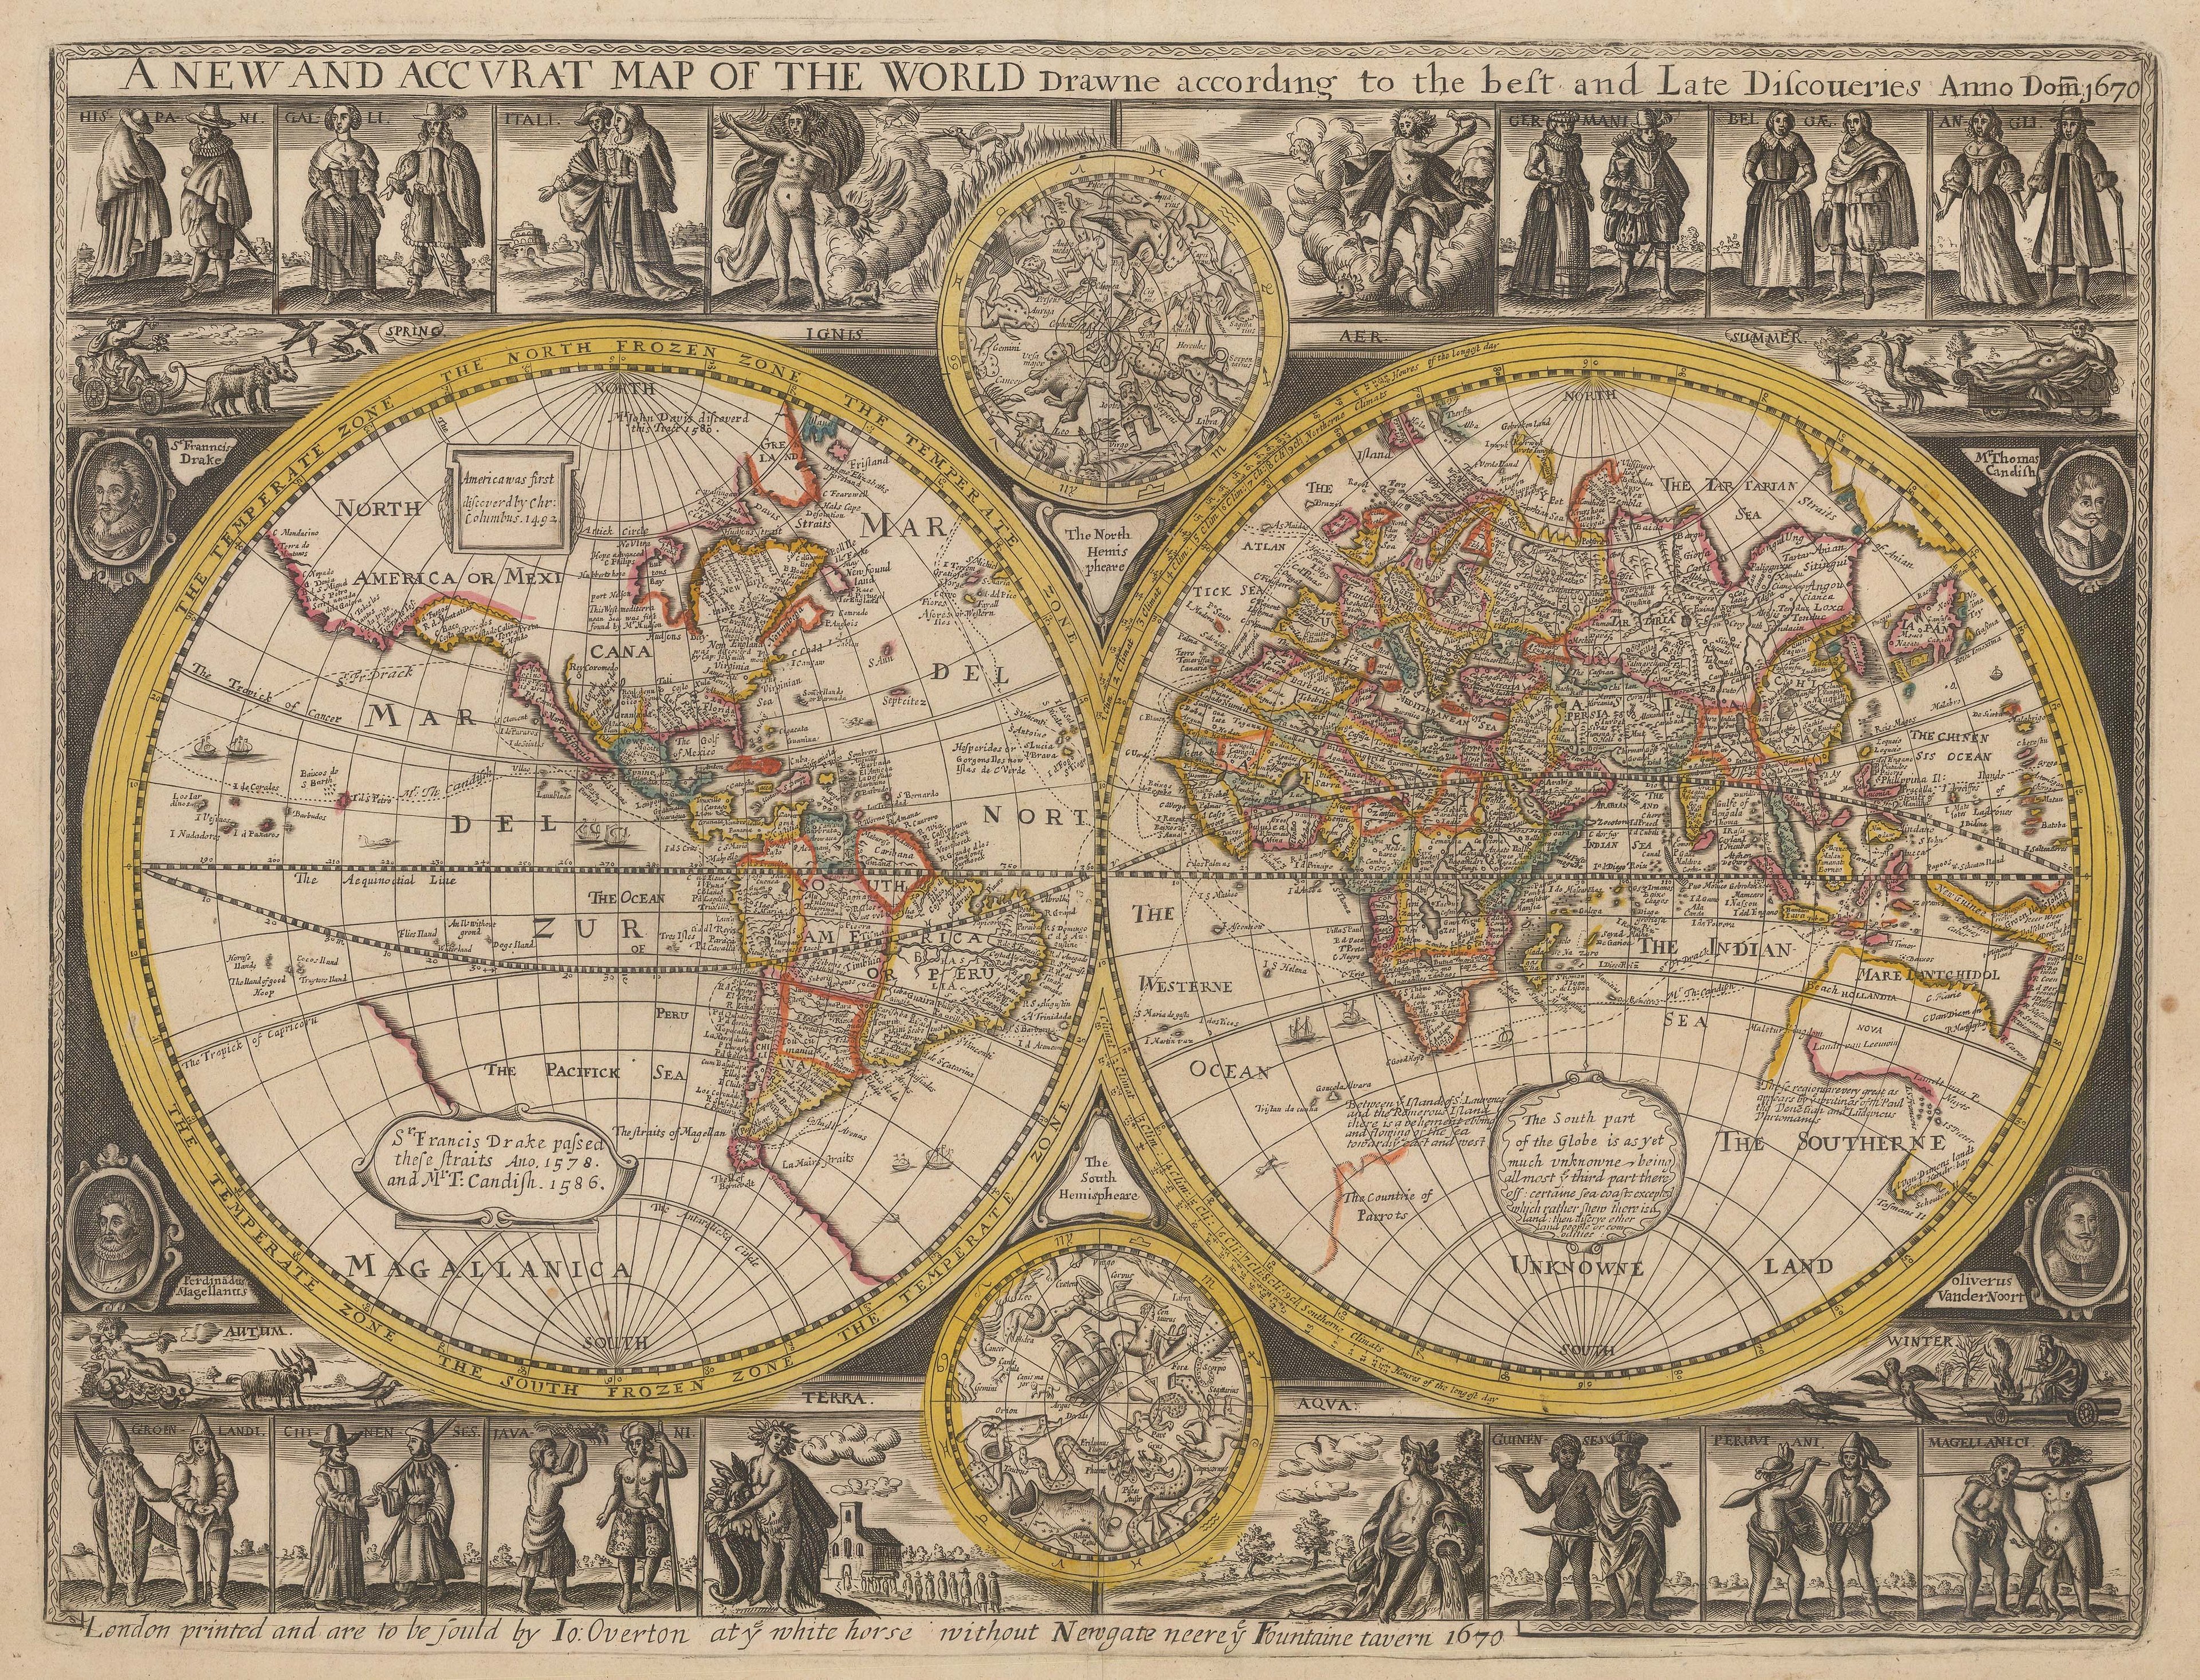 Preview of Peter Stent's double-hemisphere world map, elaborately embellished with top and bottom borders and text that reads: A new and accurate map of the world drawn according to the best and late discoveries